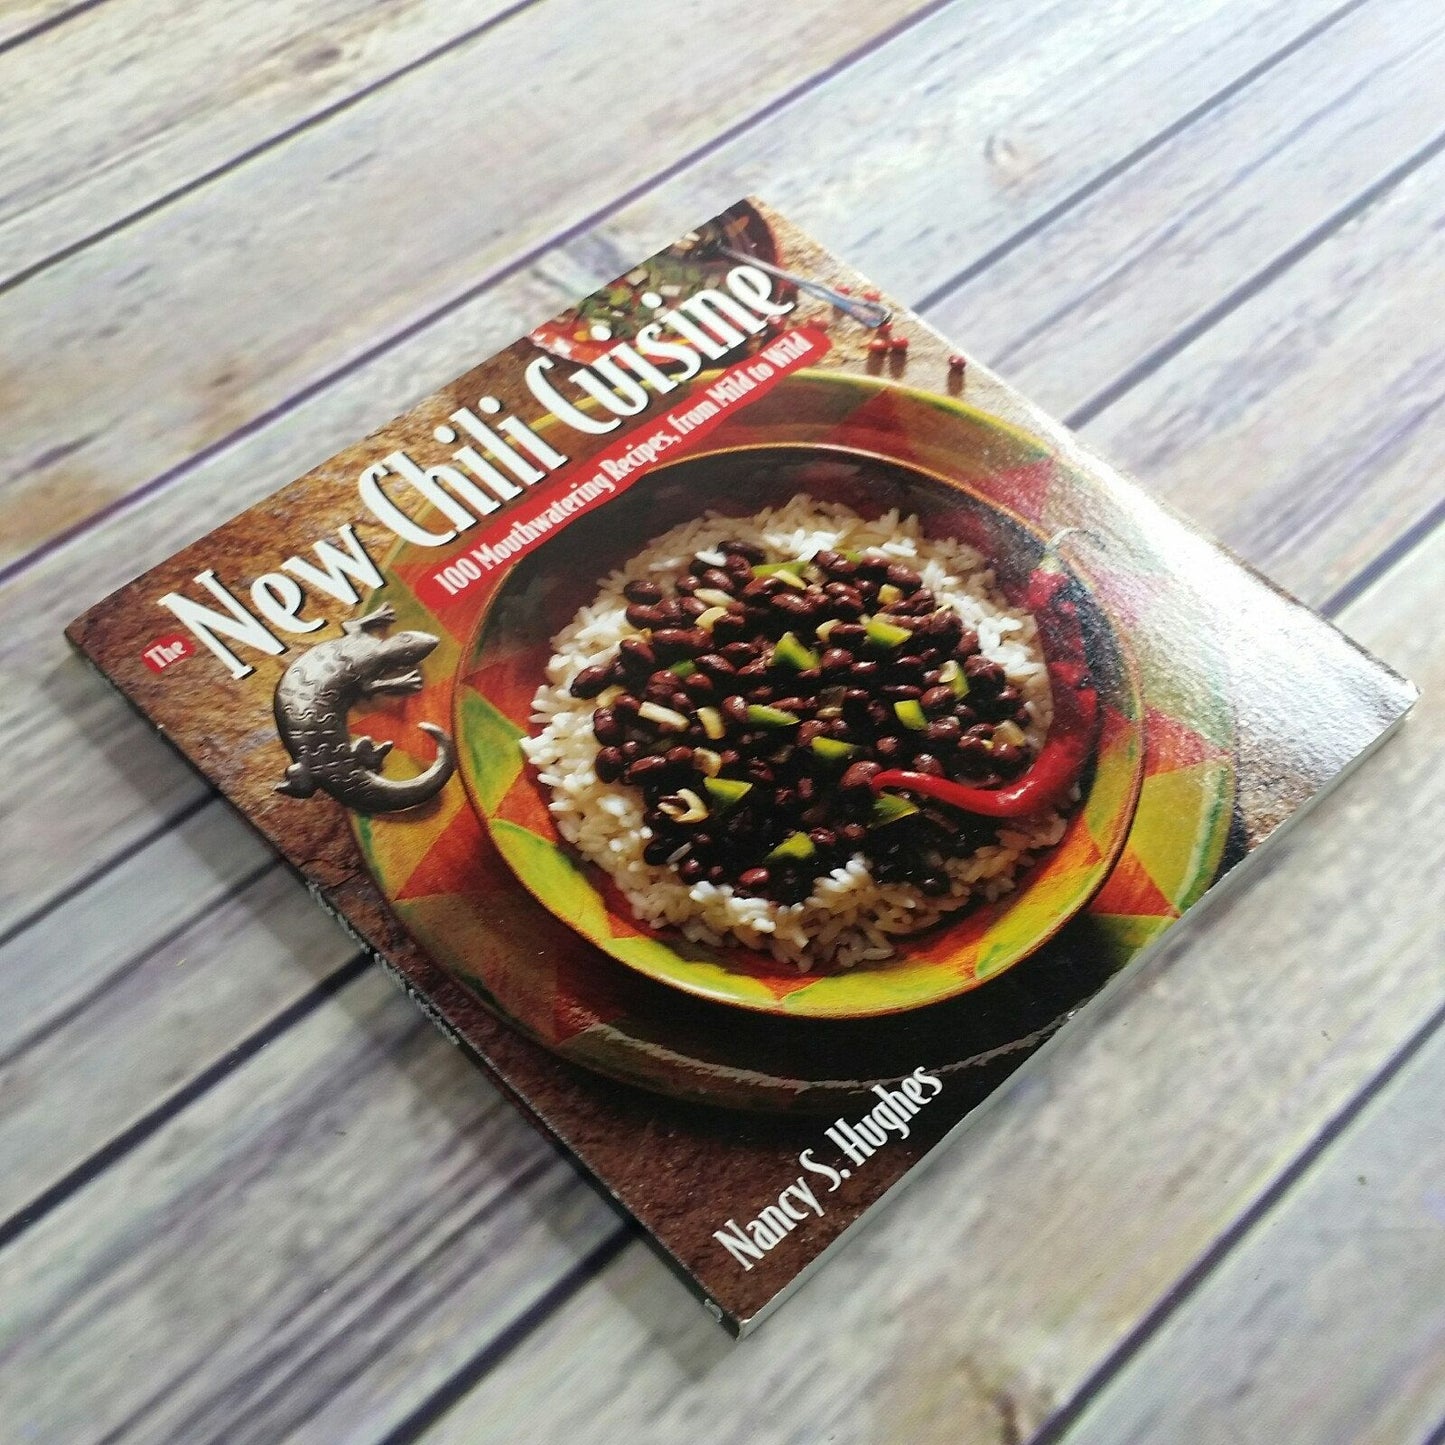 Vintage Chili Cookbook Recipes New Chili Cuisine 100 recipes from Mild to Wild Nancy Hughes 1996 Paperback